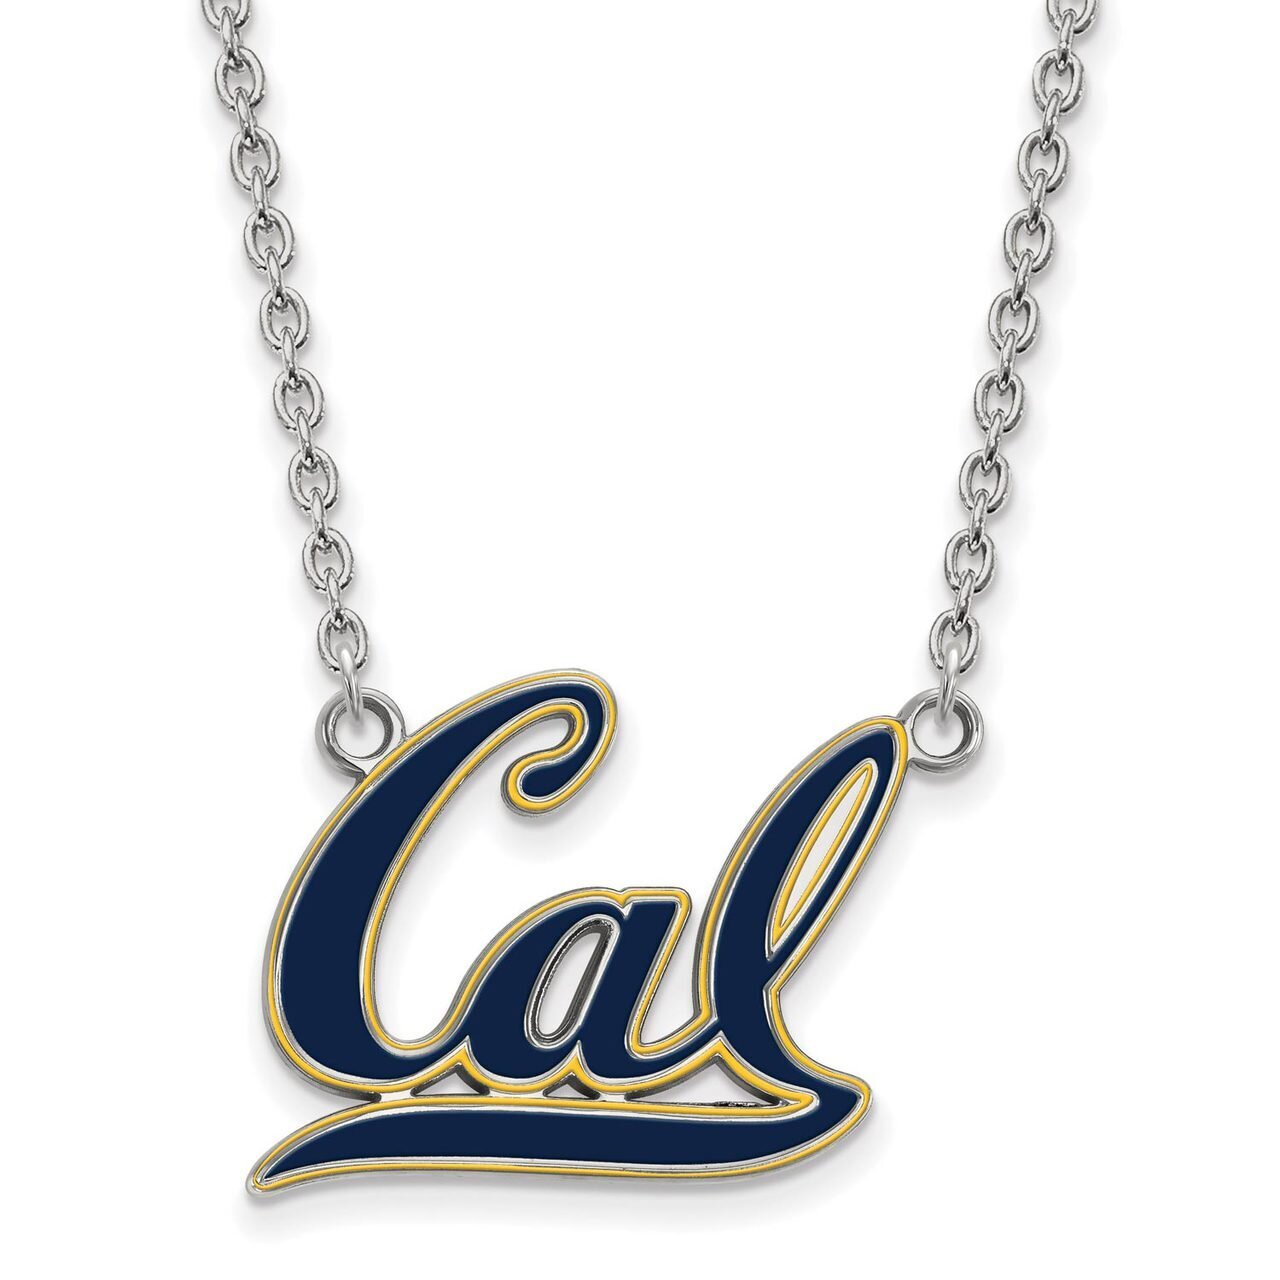 University of California Berkeley Large Enamel Pendant with Necklace Sterling Silver SS047UCB